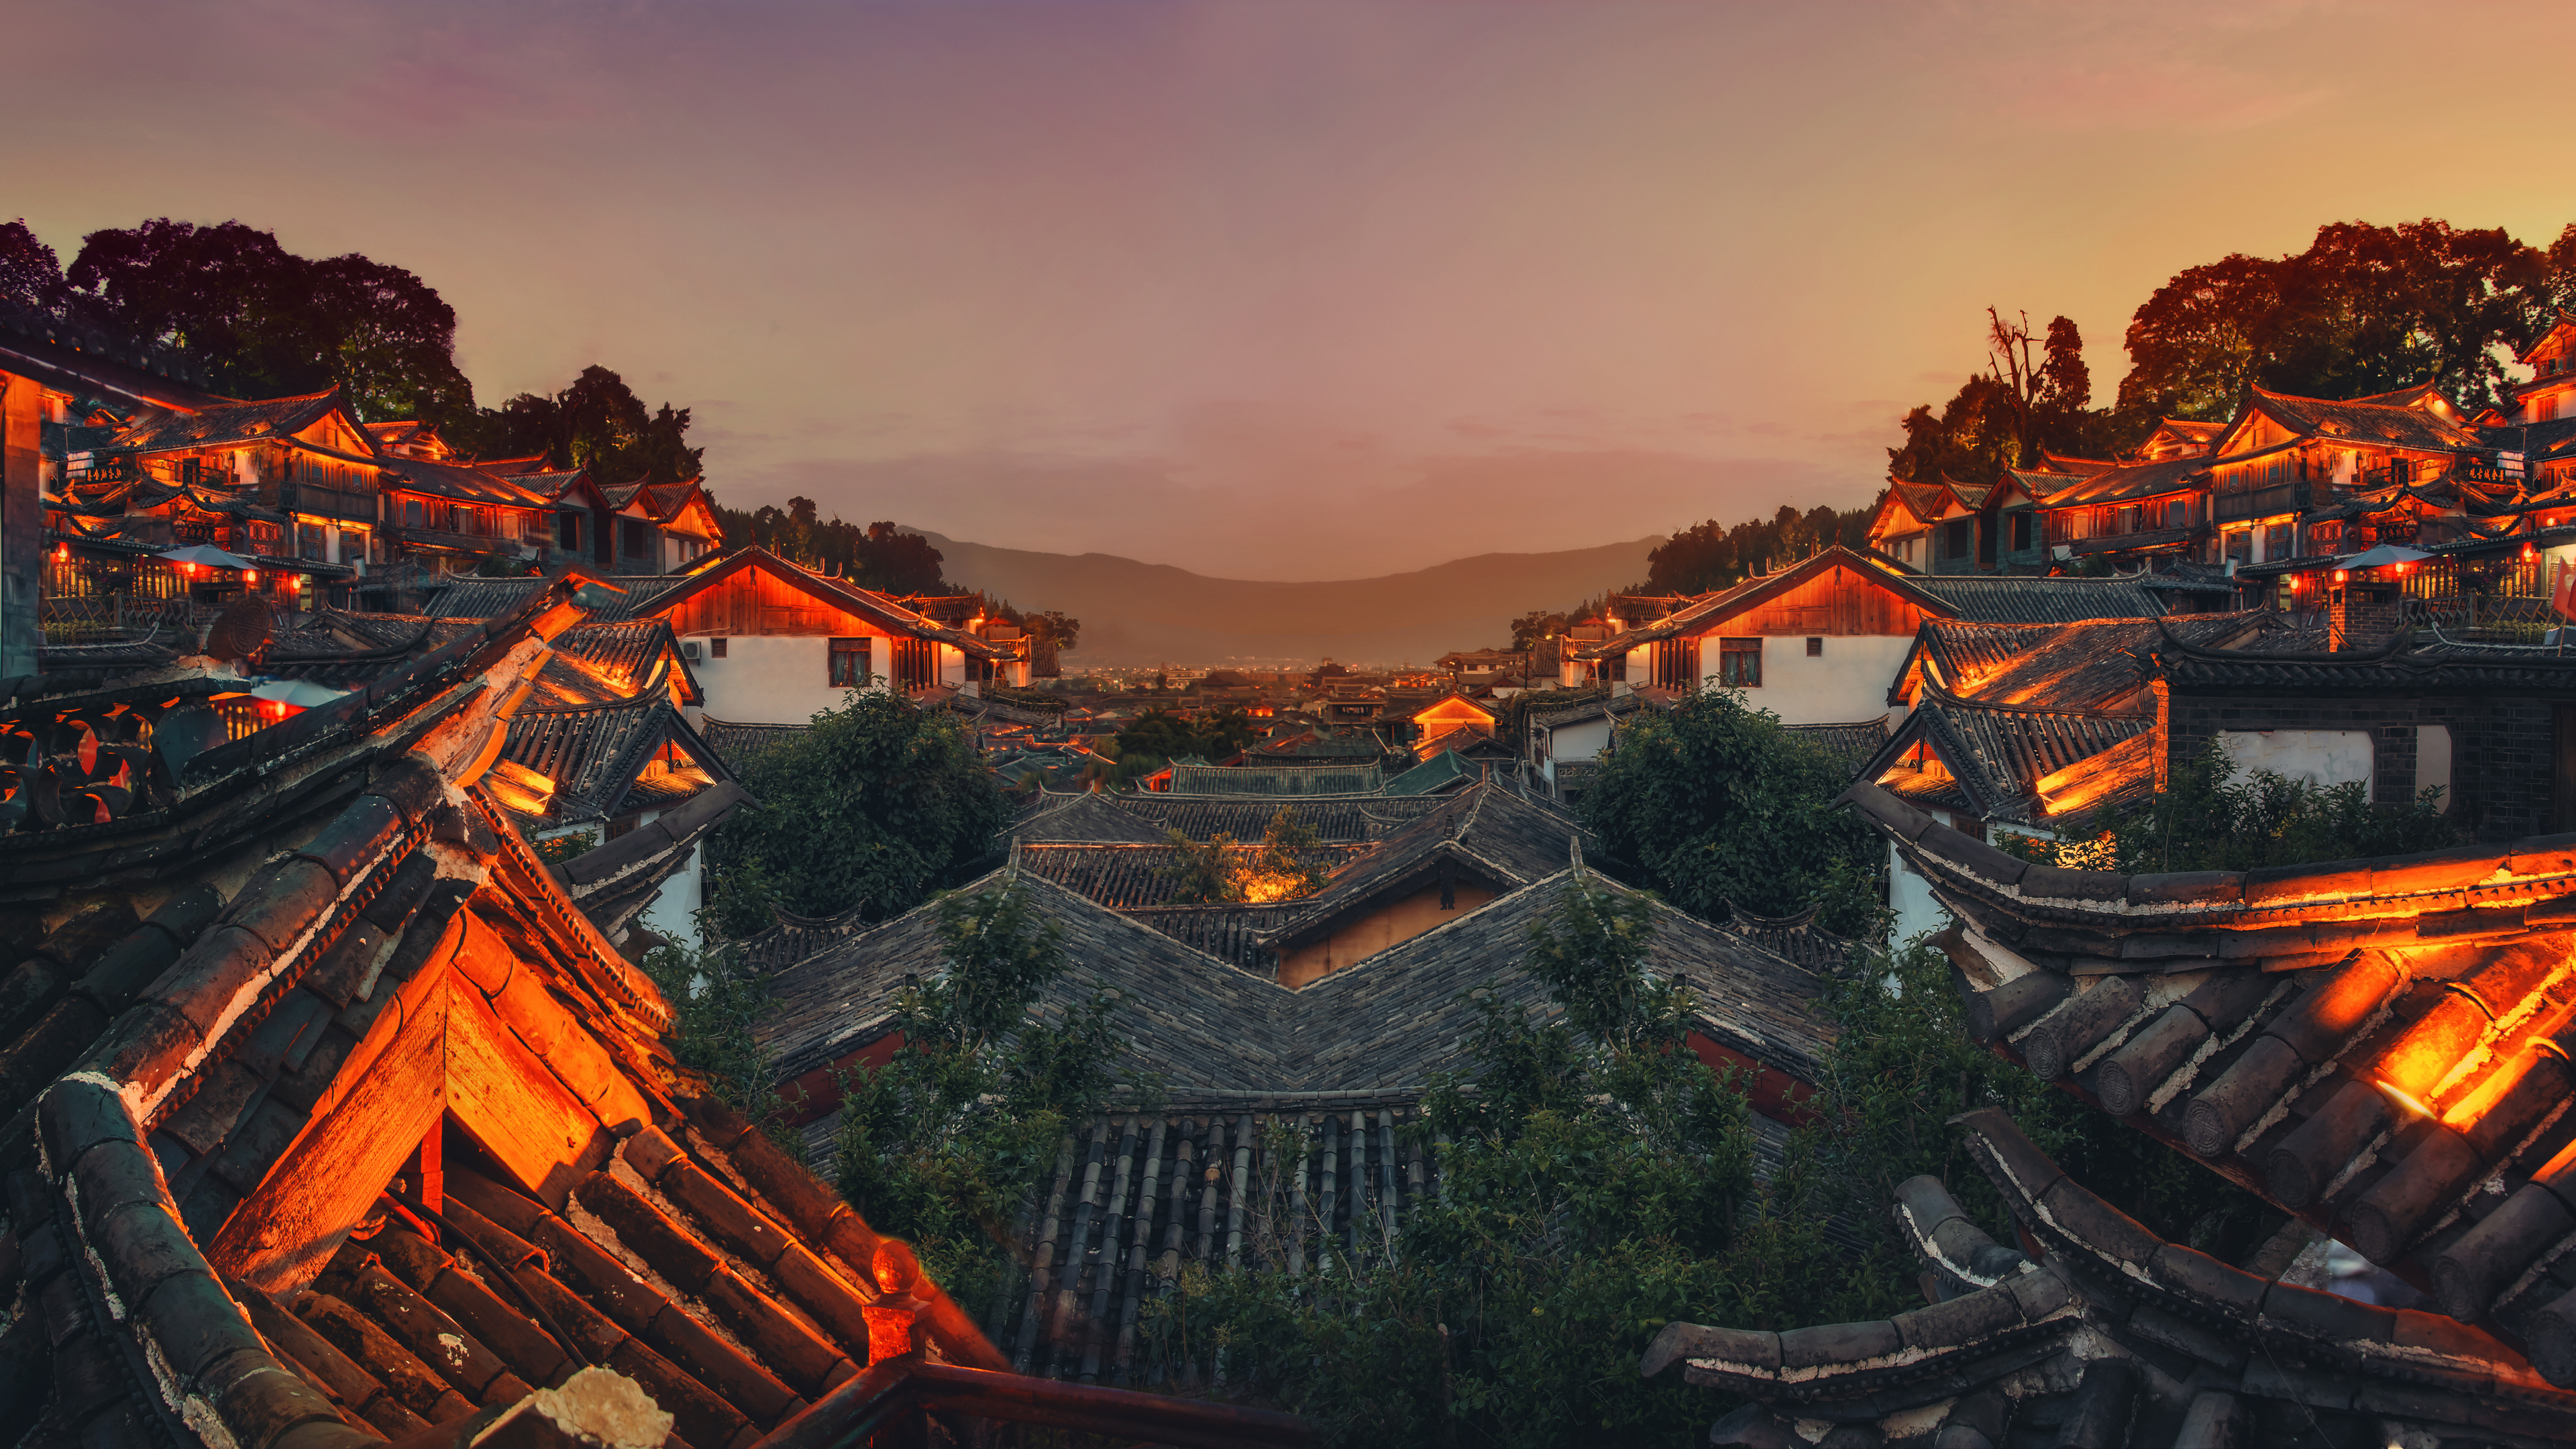 General 3840x2160 China photography Trey Ratcliff sunset mountains horizon Chinese architecture cityscape old building Lijiang City